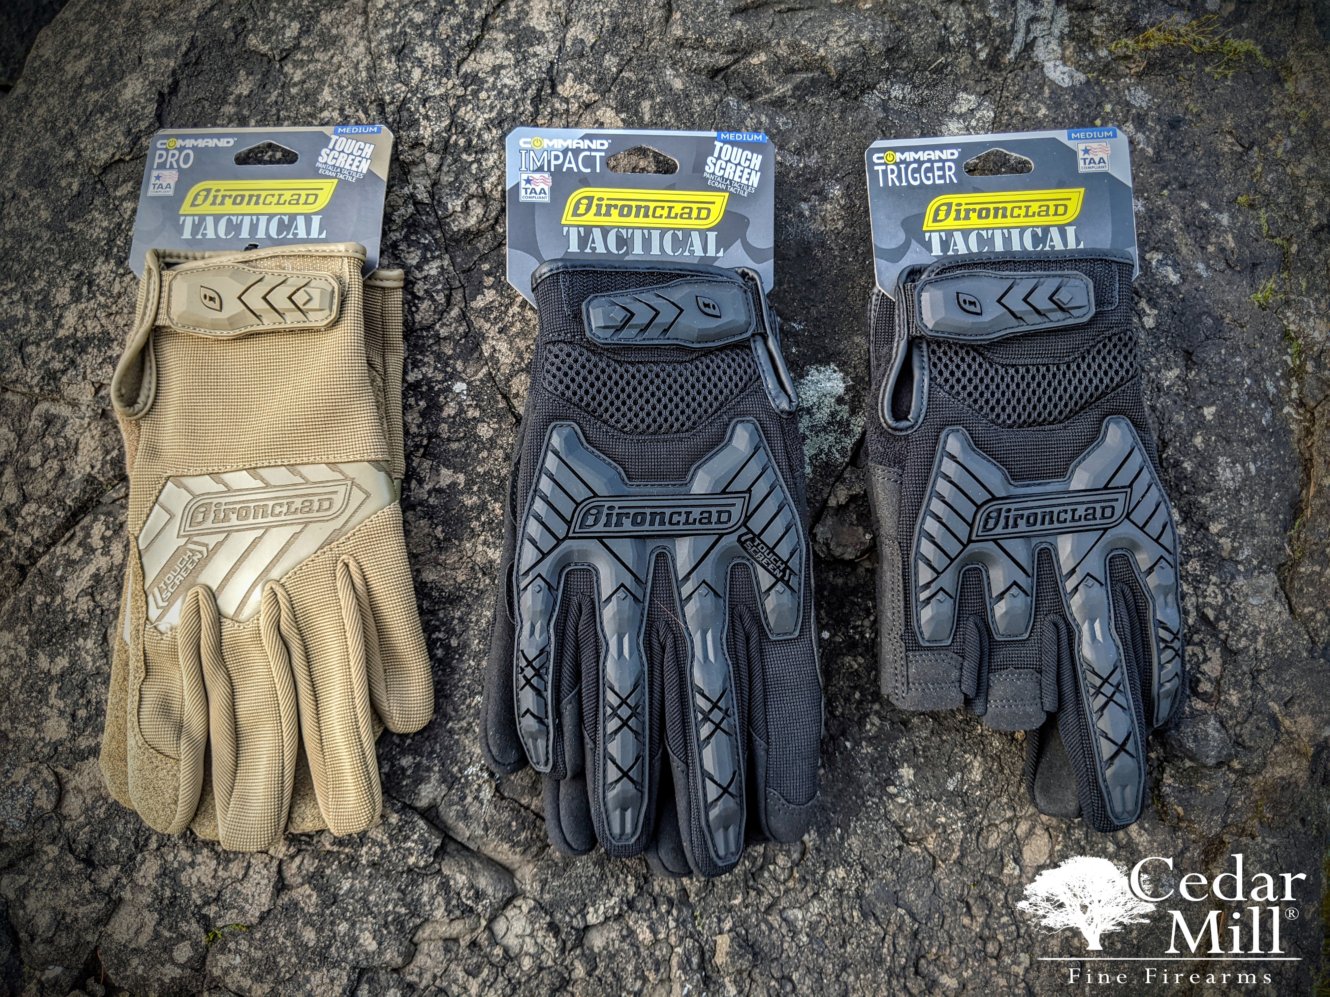 The Complete Guide in Searching for the Best Ironclad Tactical Gloves -  Cedar Mill Fine Firearms